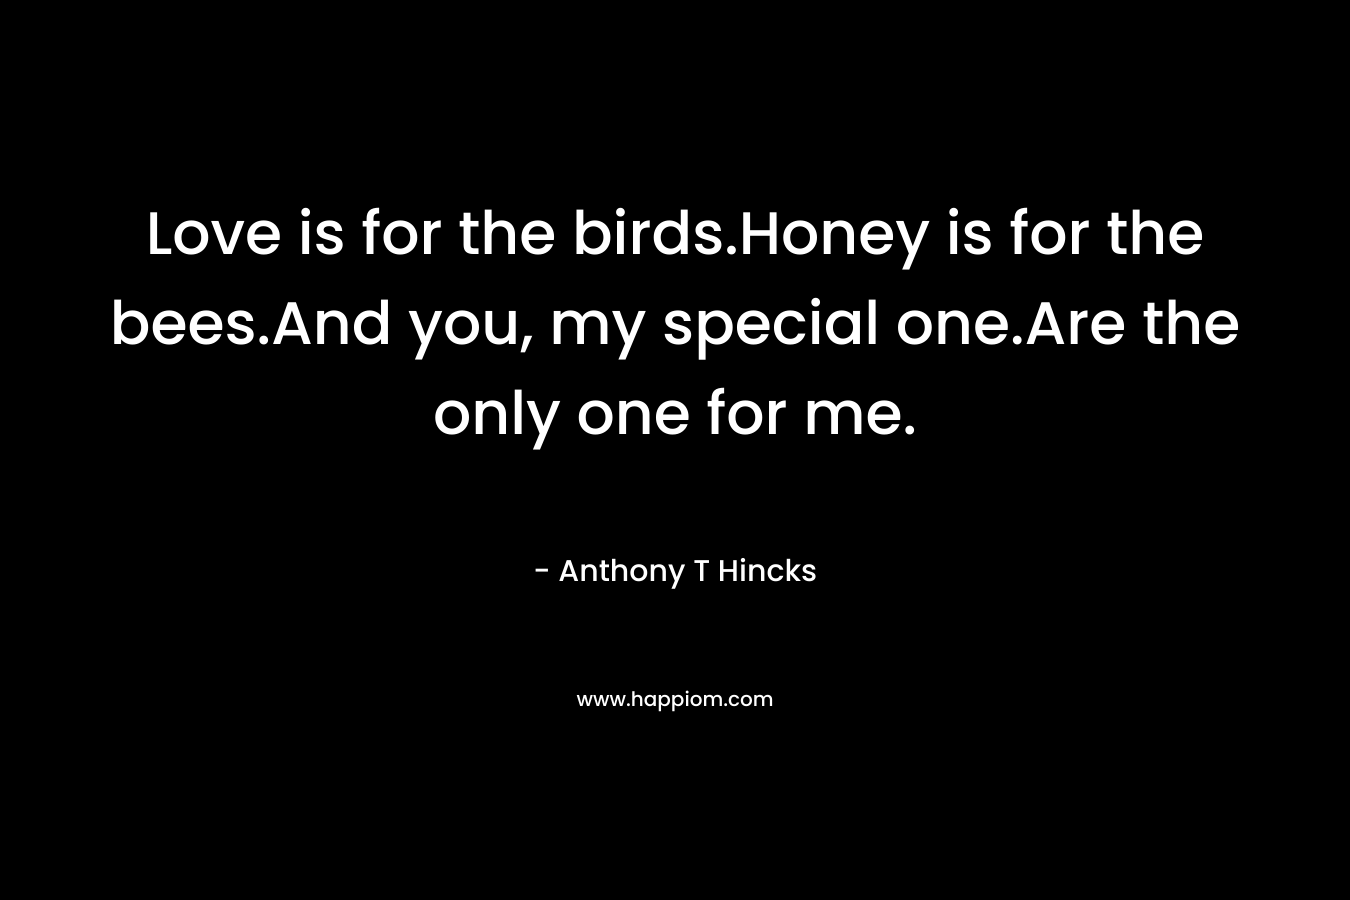 Love is for the birds.Honey is for the bees.And you, my special one.Are the only one for me.